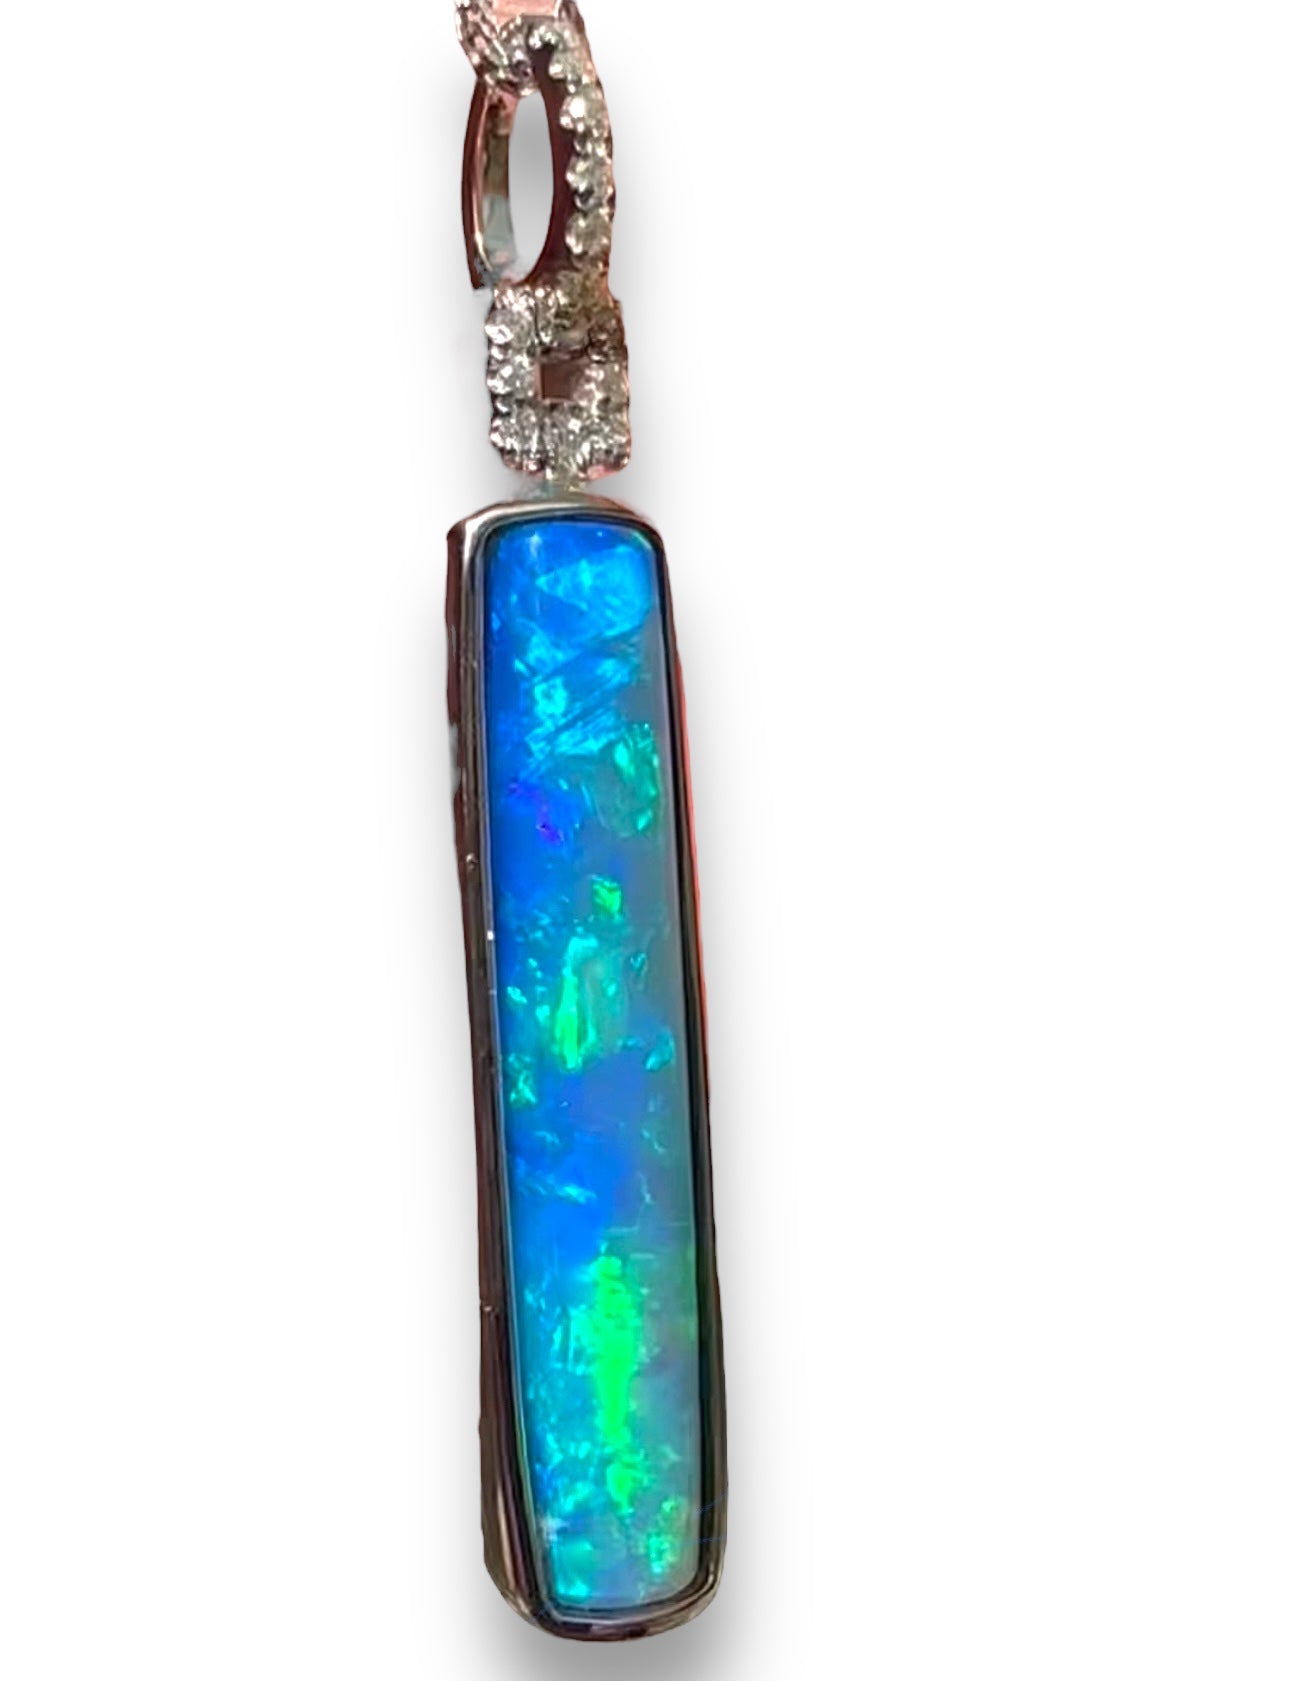 Exquisite opal Belemnite set in 18k gold and diamonds - Opal Essence Wholesalers